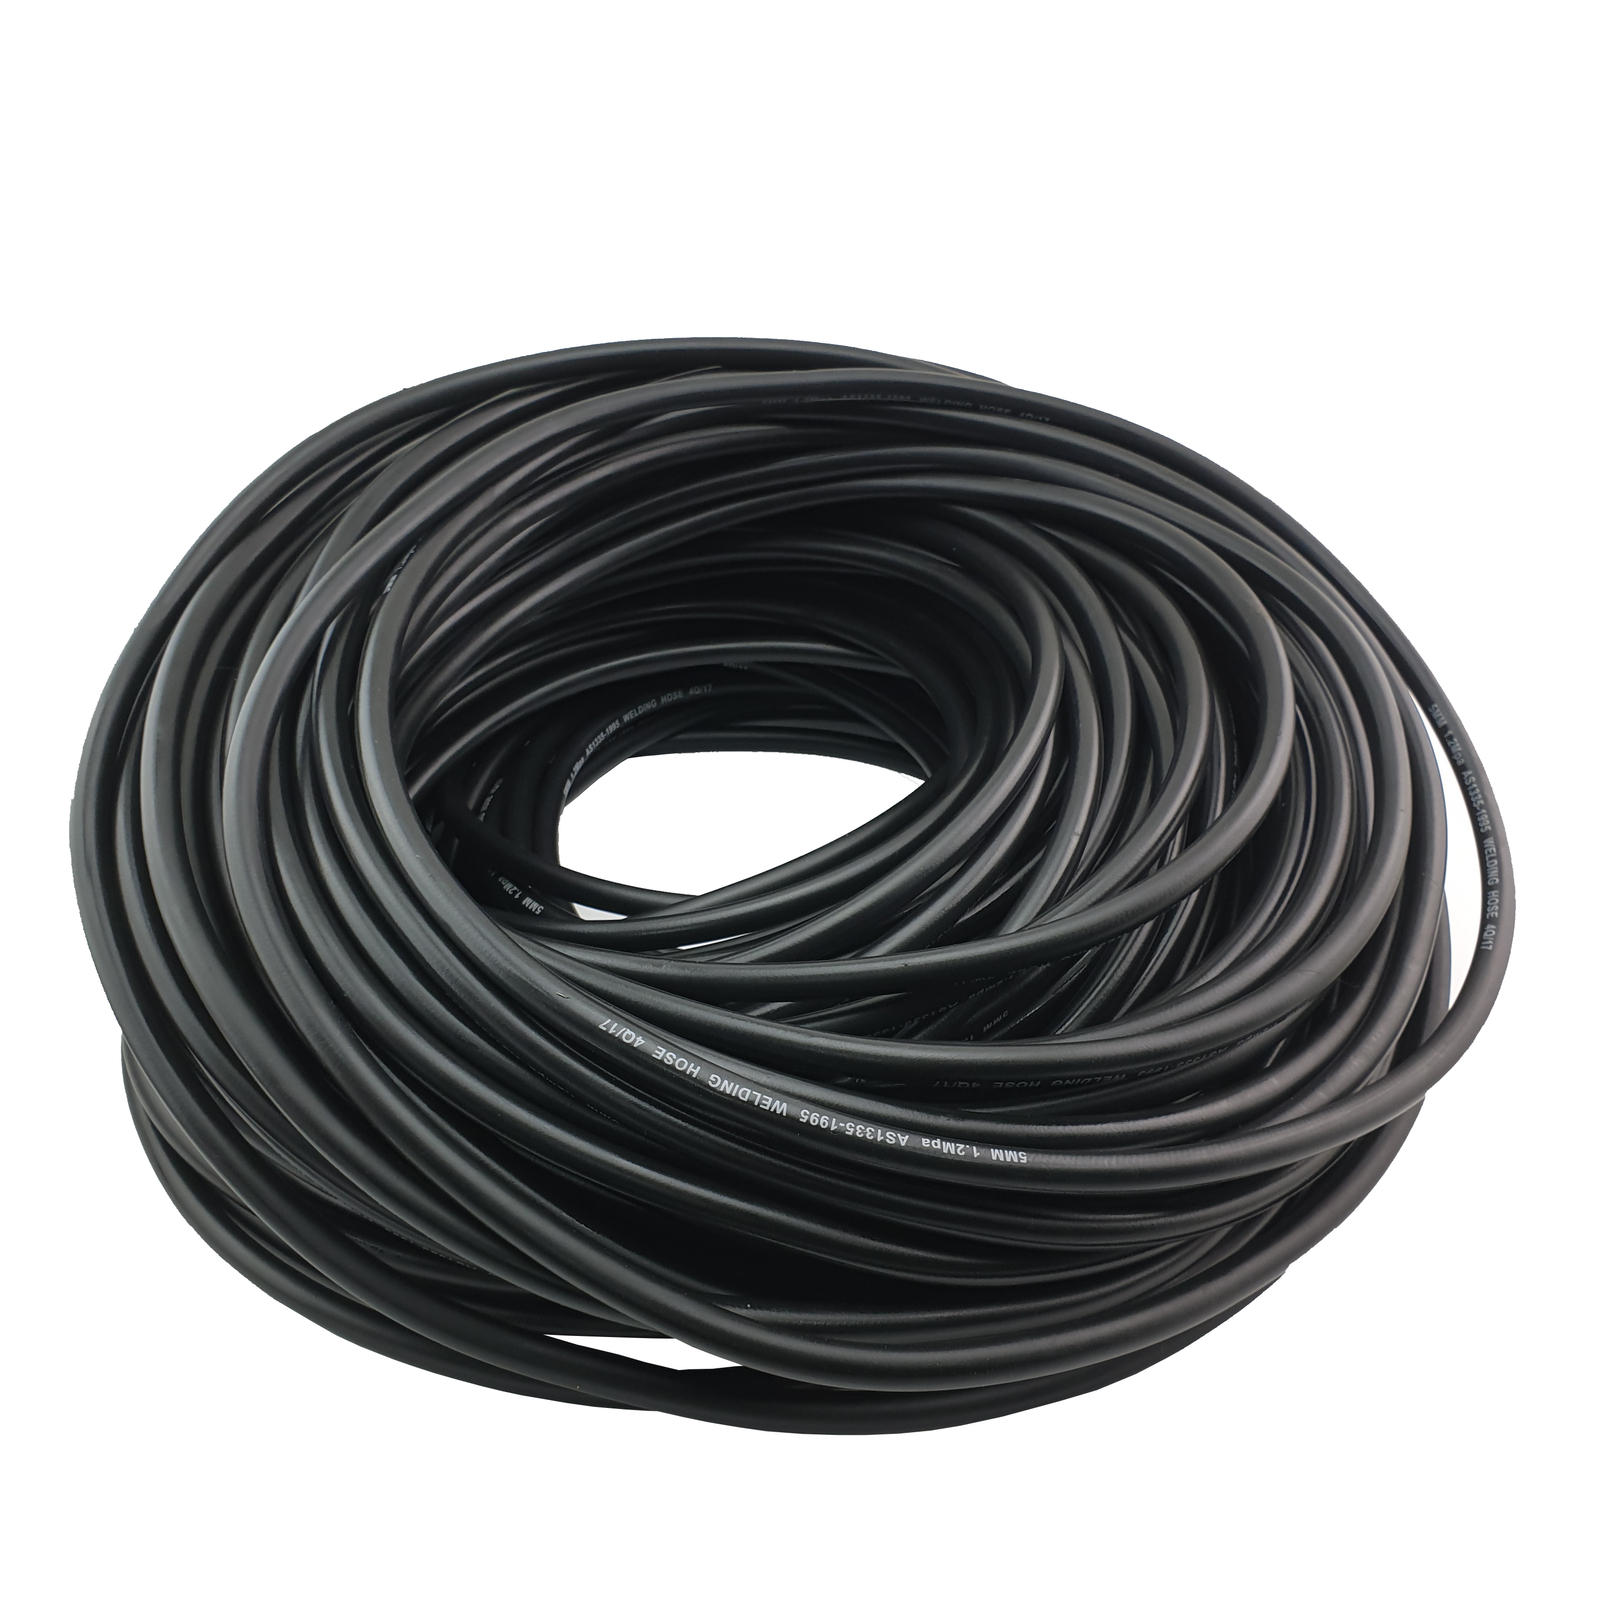  Gas hose 5mm for Argon - 100m roll